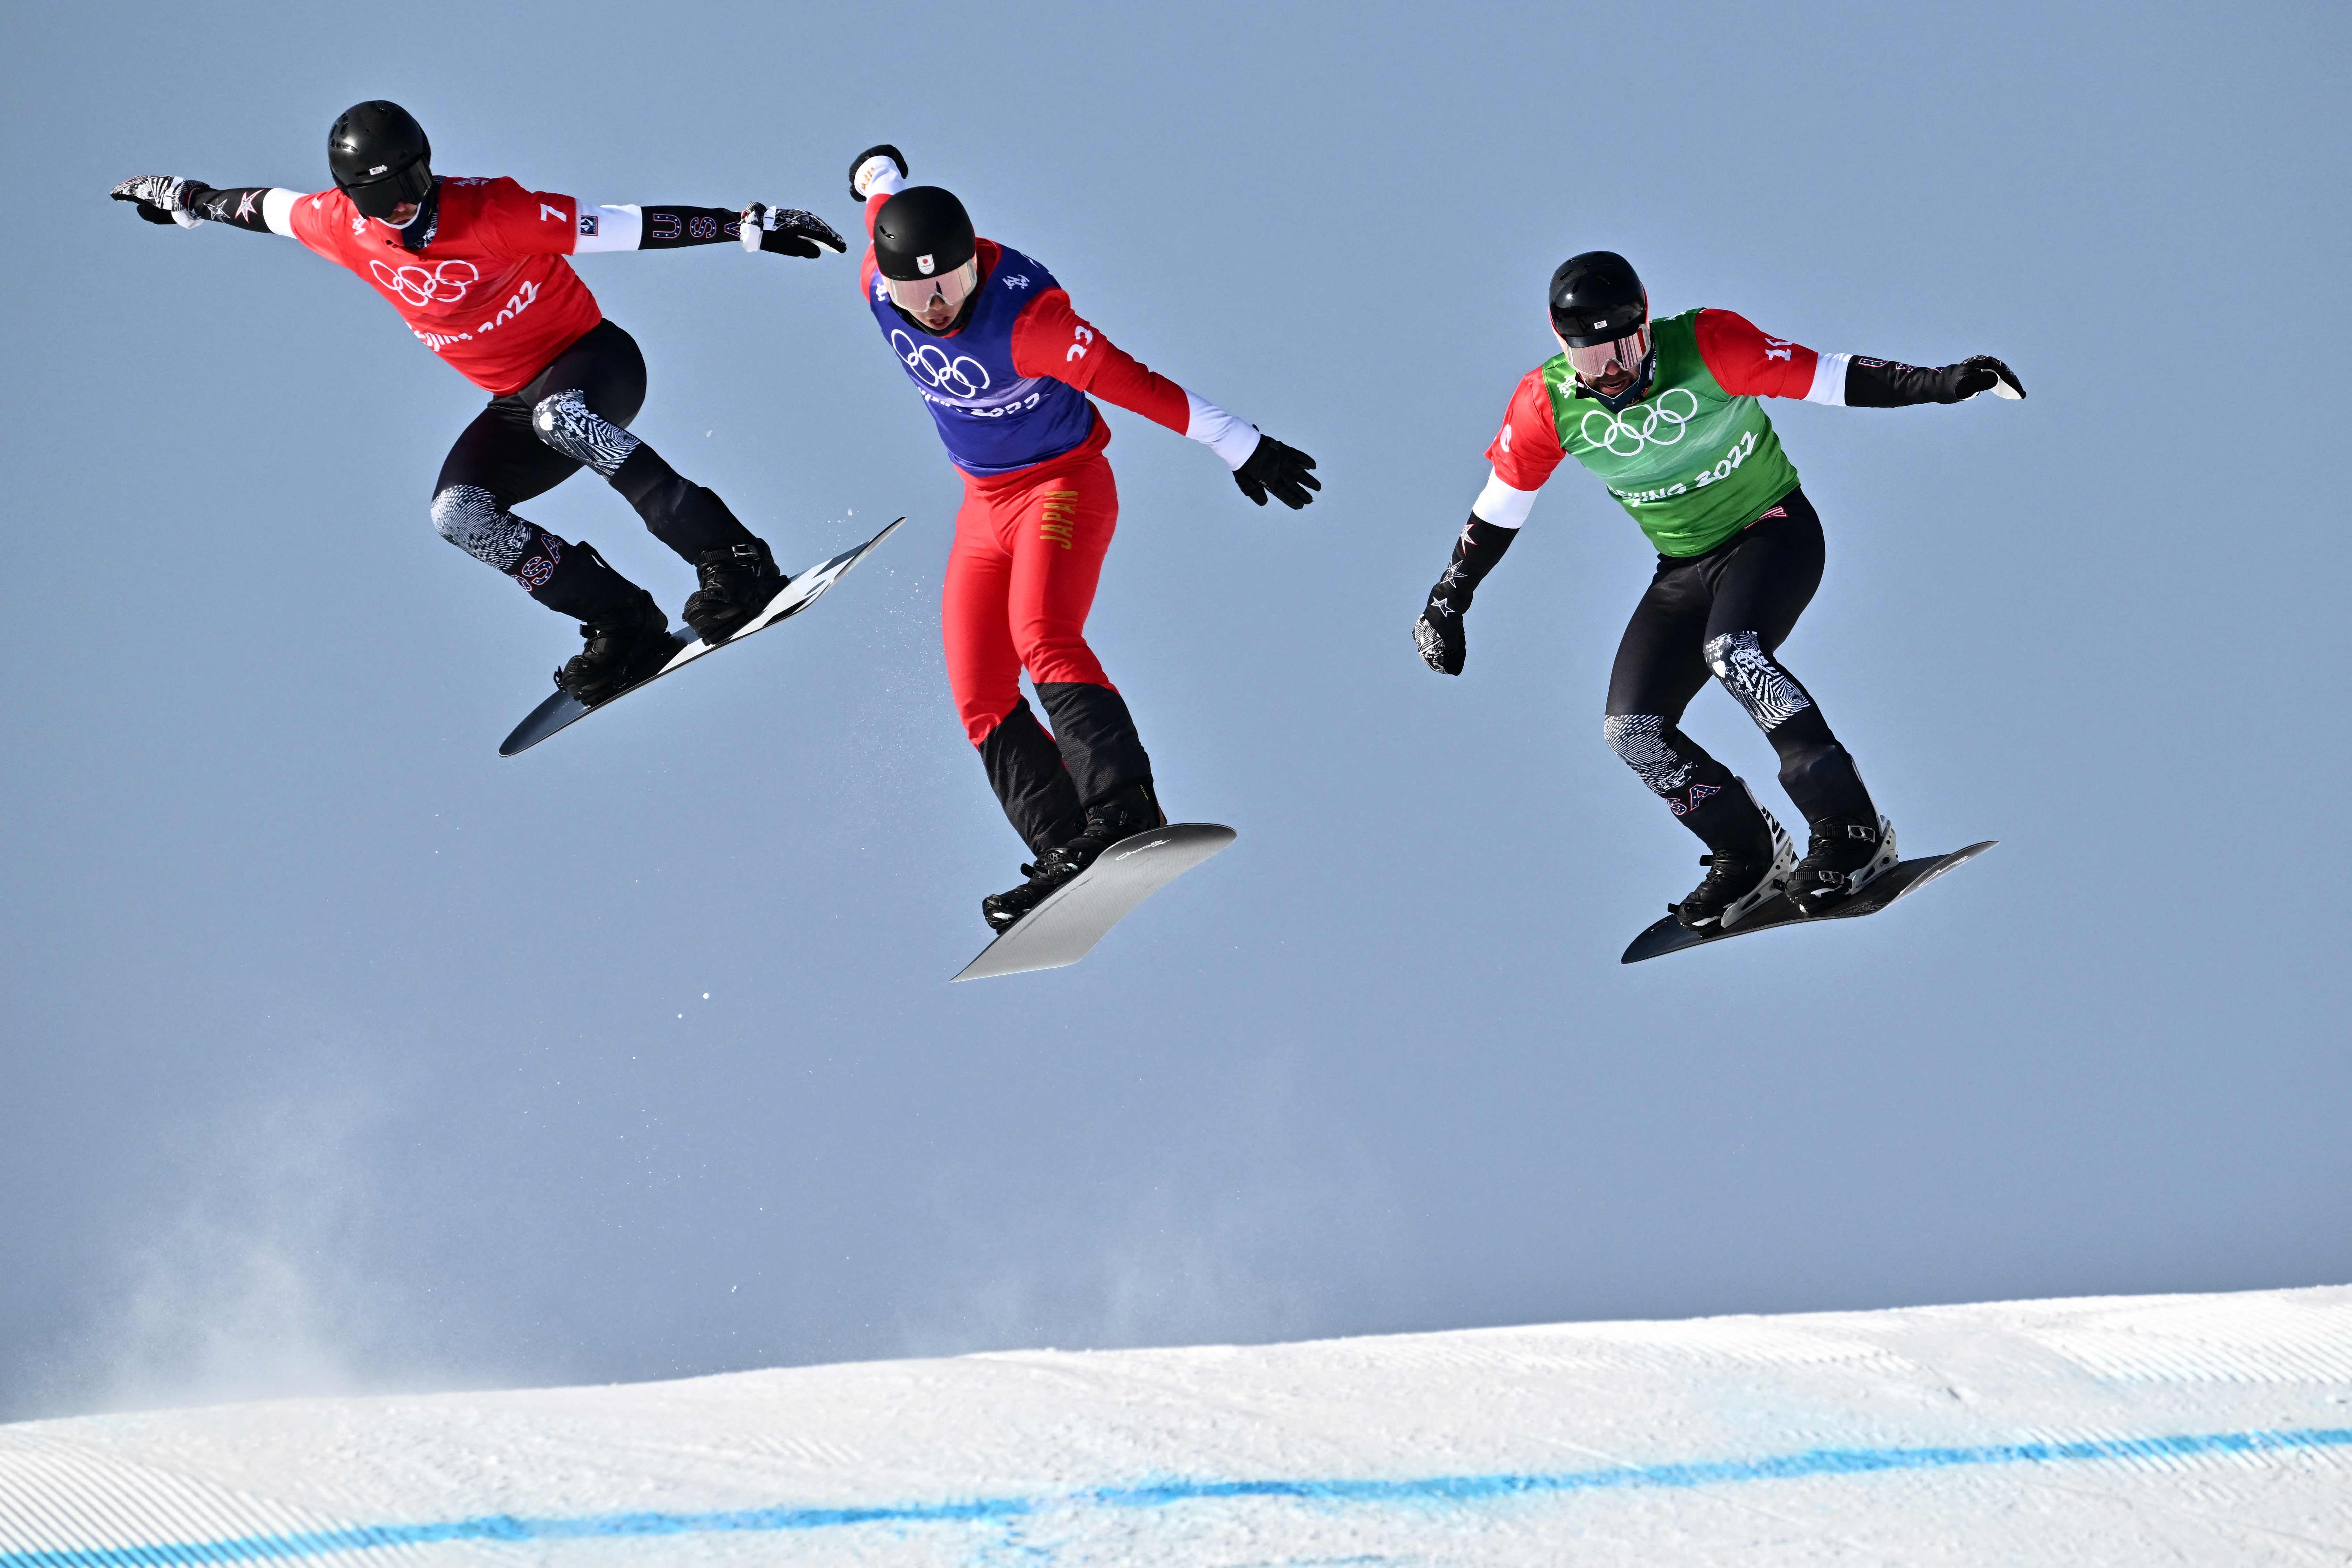 Hagen Kearney (L) competing for Team USA at the 2022 Beijing Winter Olympics